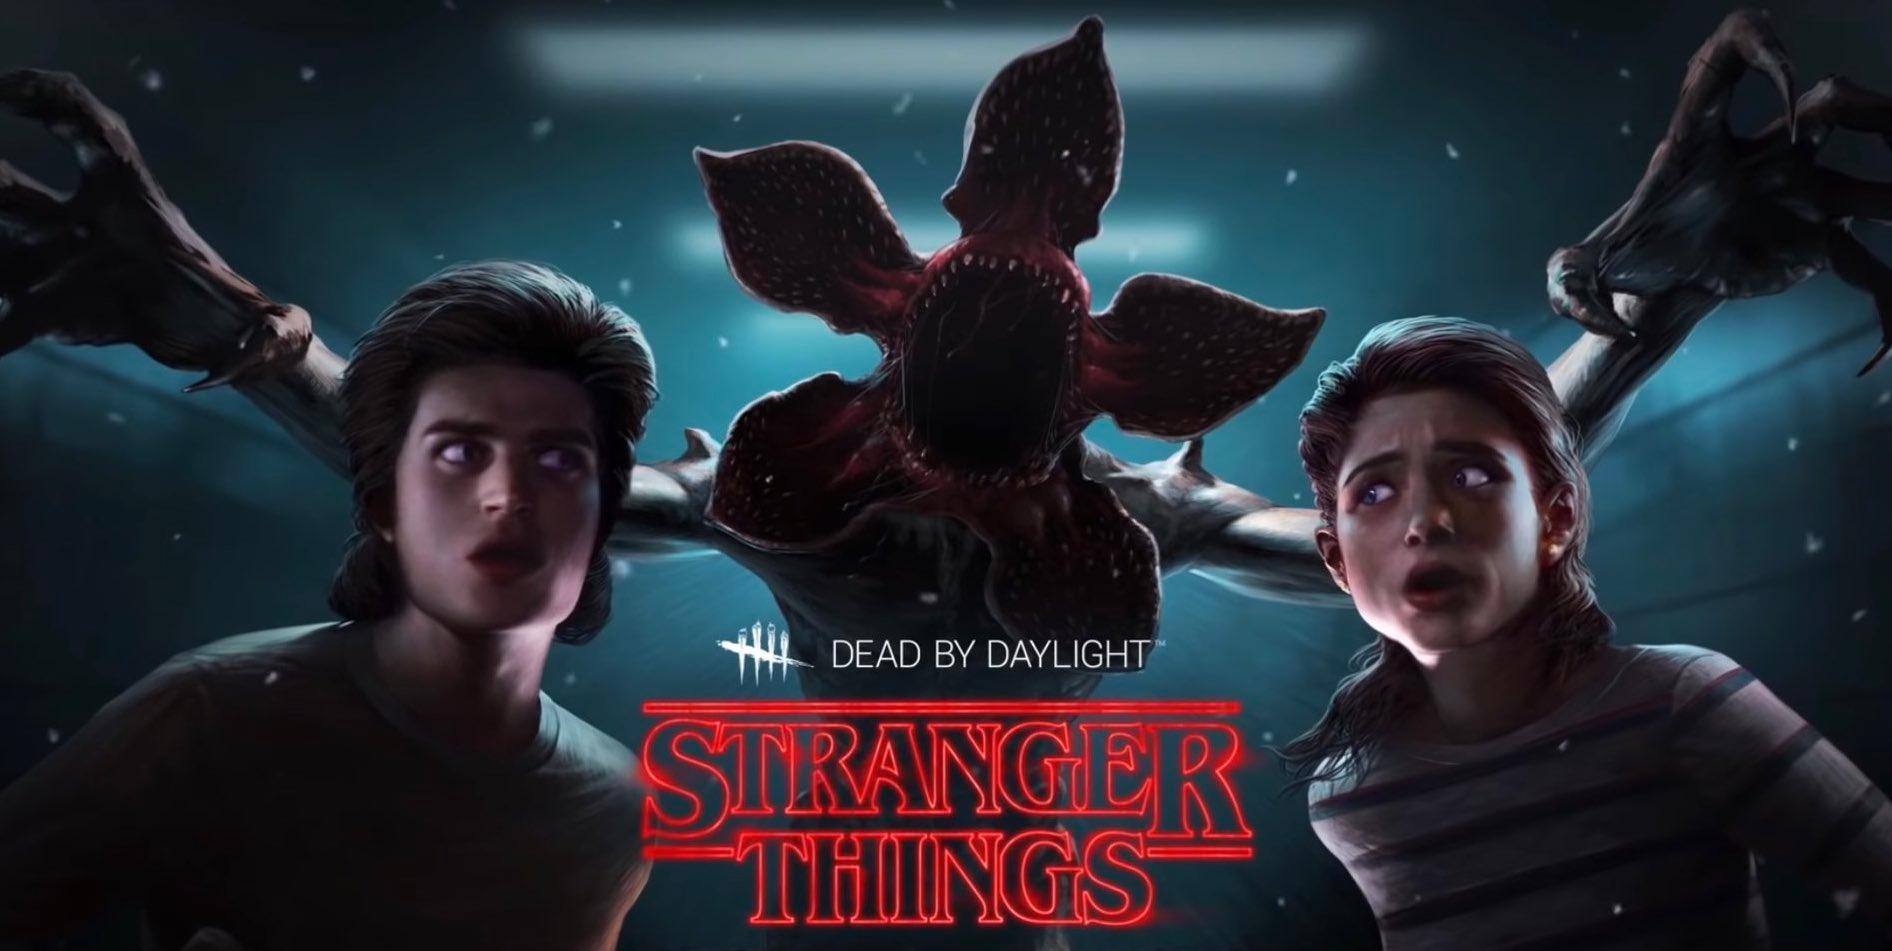 'Stranger Things' is Coming Back to 'Dead by Daylight'?